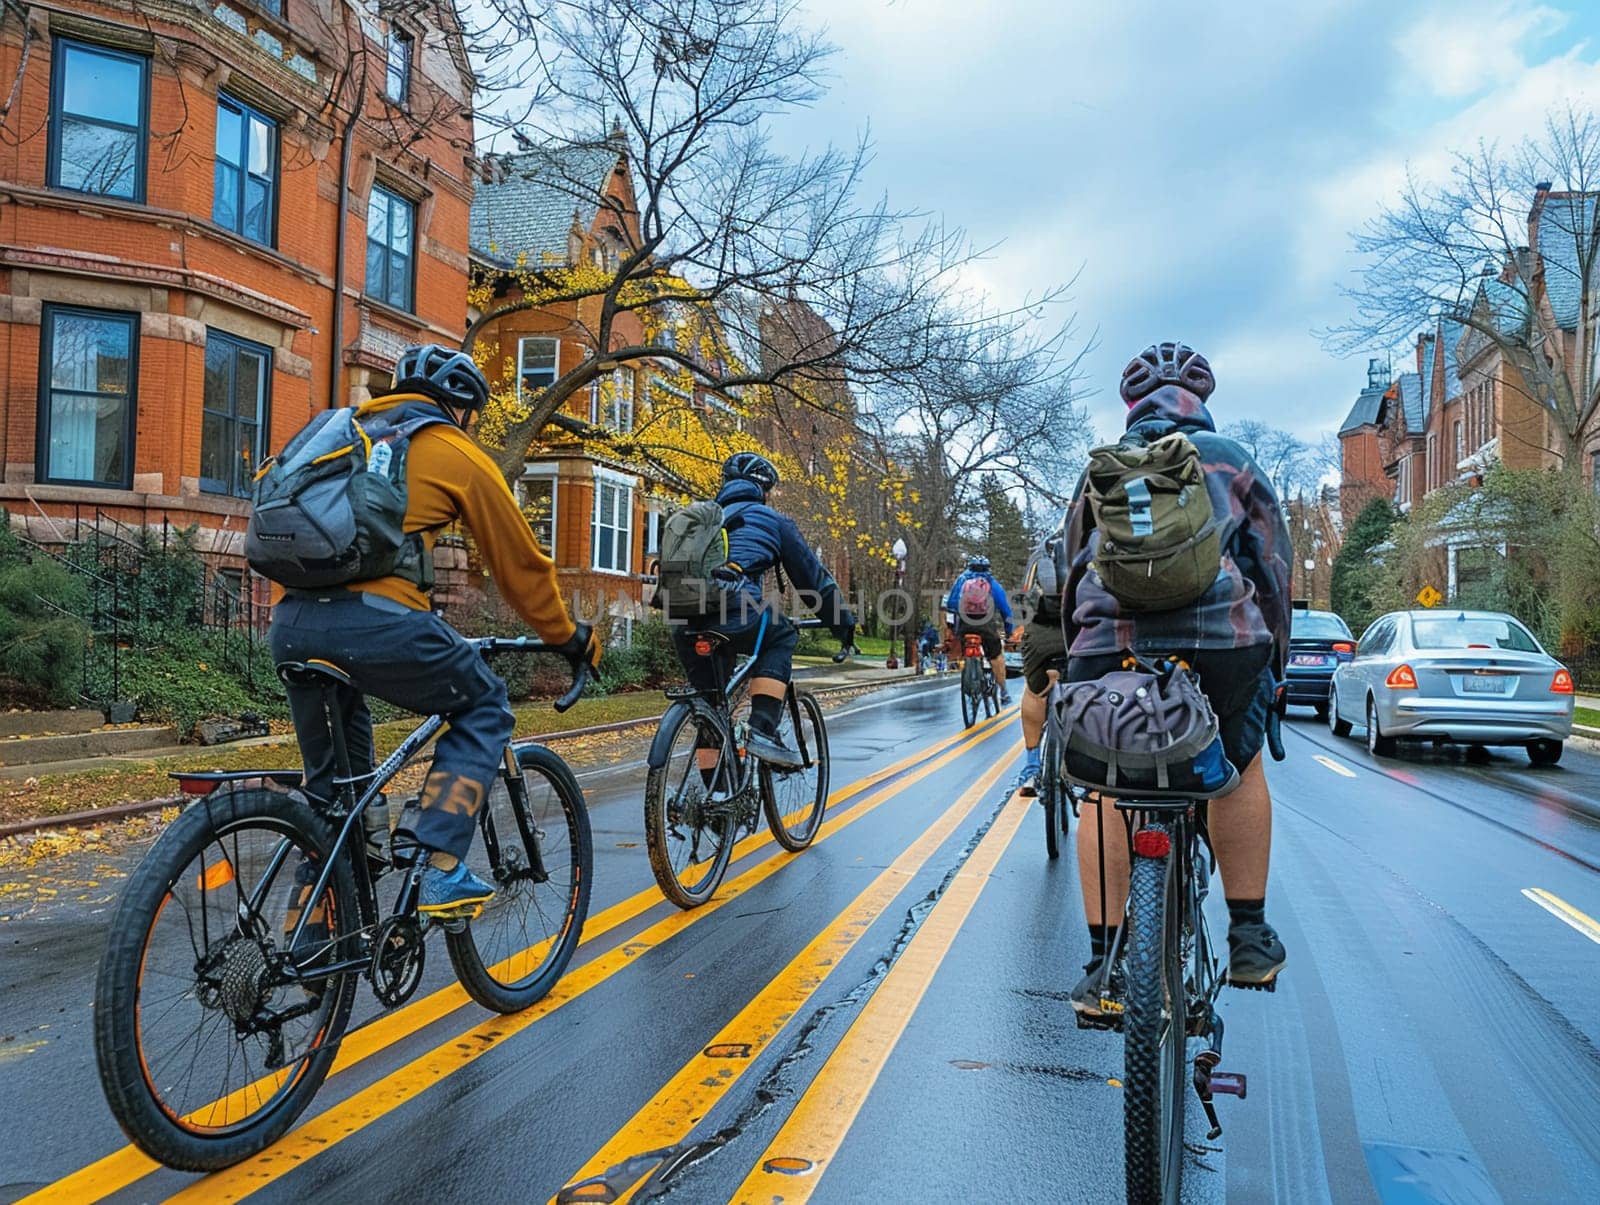 Urban Cycling Trail Advocates Healthy Commutes in Business of Sustainable Transportation, City cyclists and bike lanes advocate a story of healthy commutes and sustainable transportation in the urban cycling trail business.